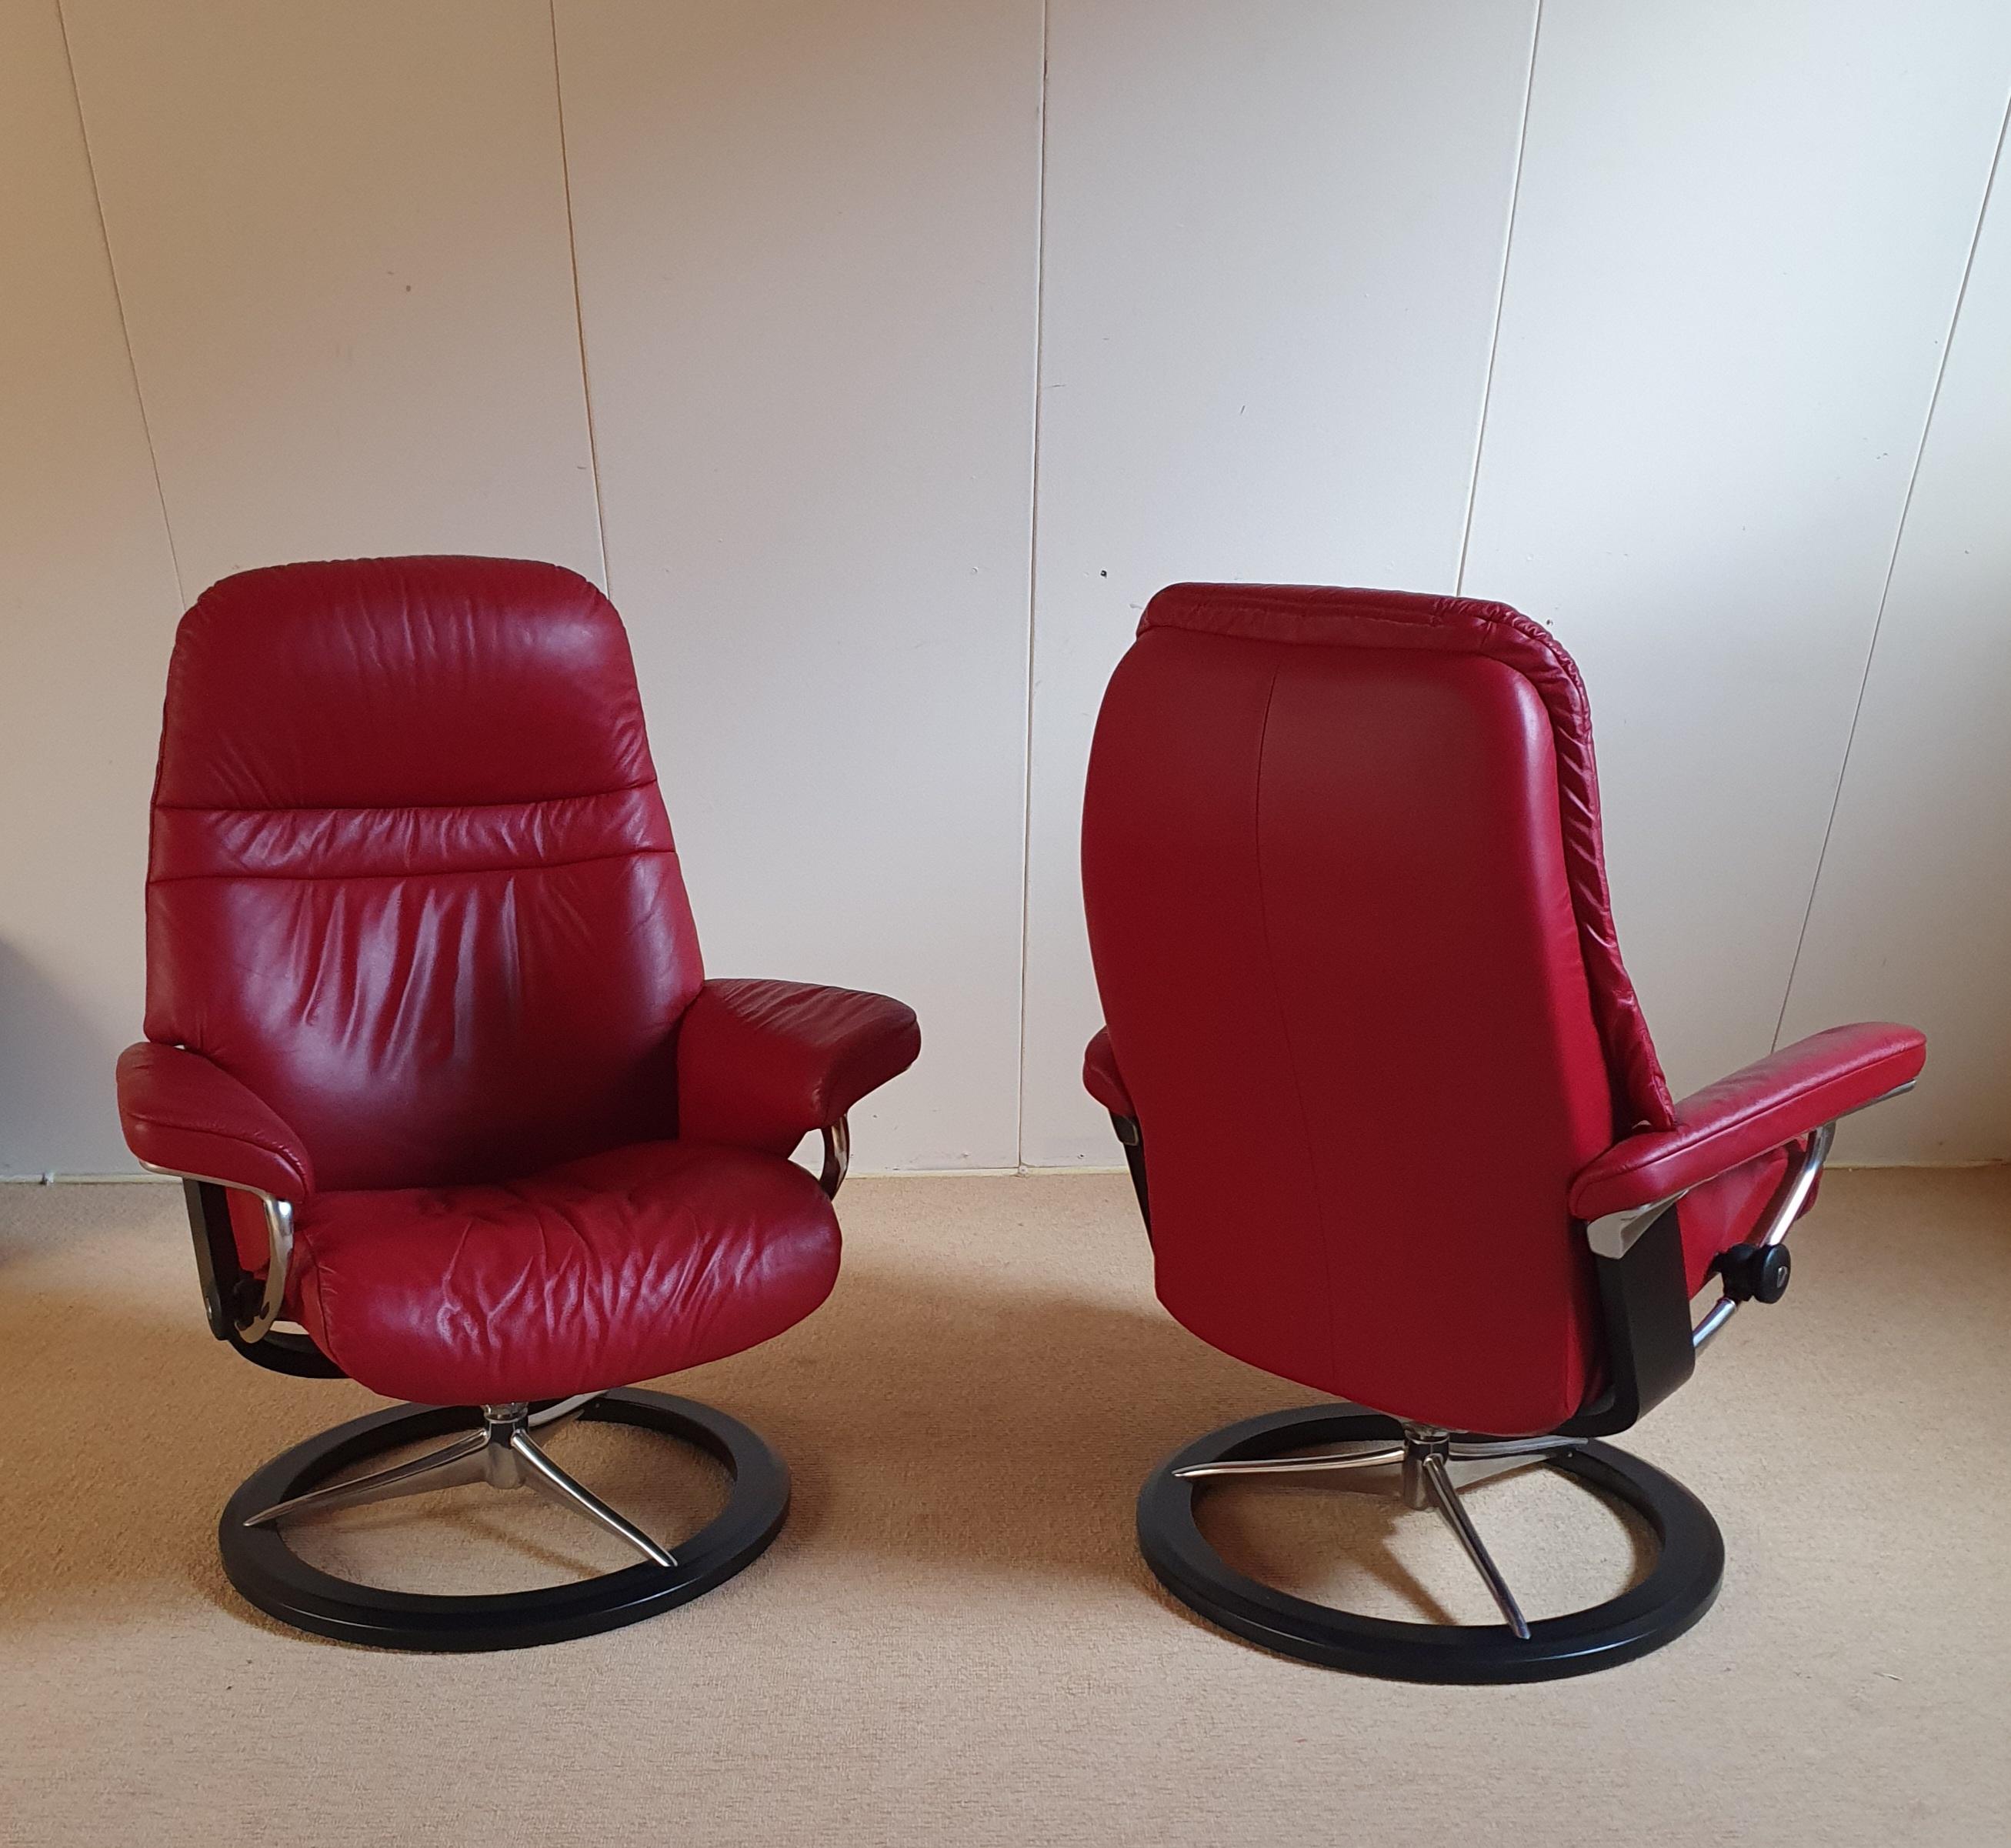 2 x Stressless Aura Recliner chairs with Signature in Cori leather Brick Red 7